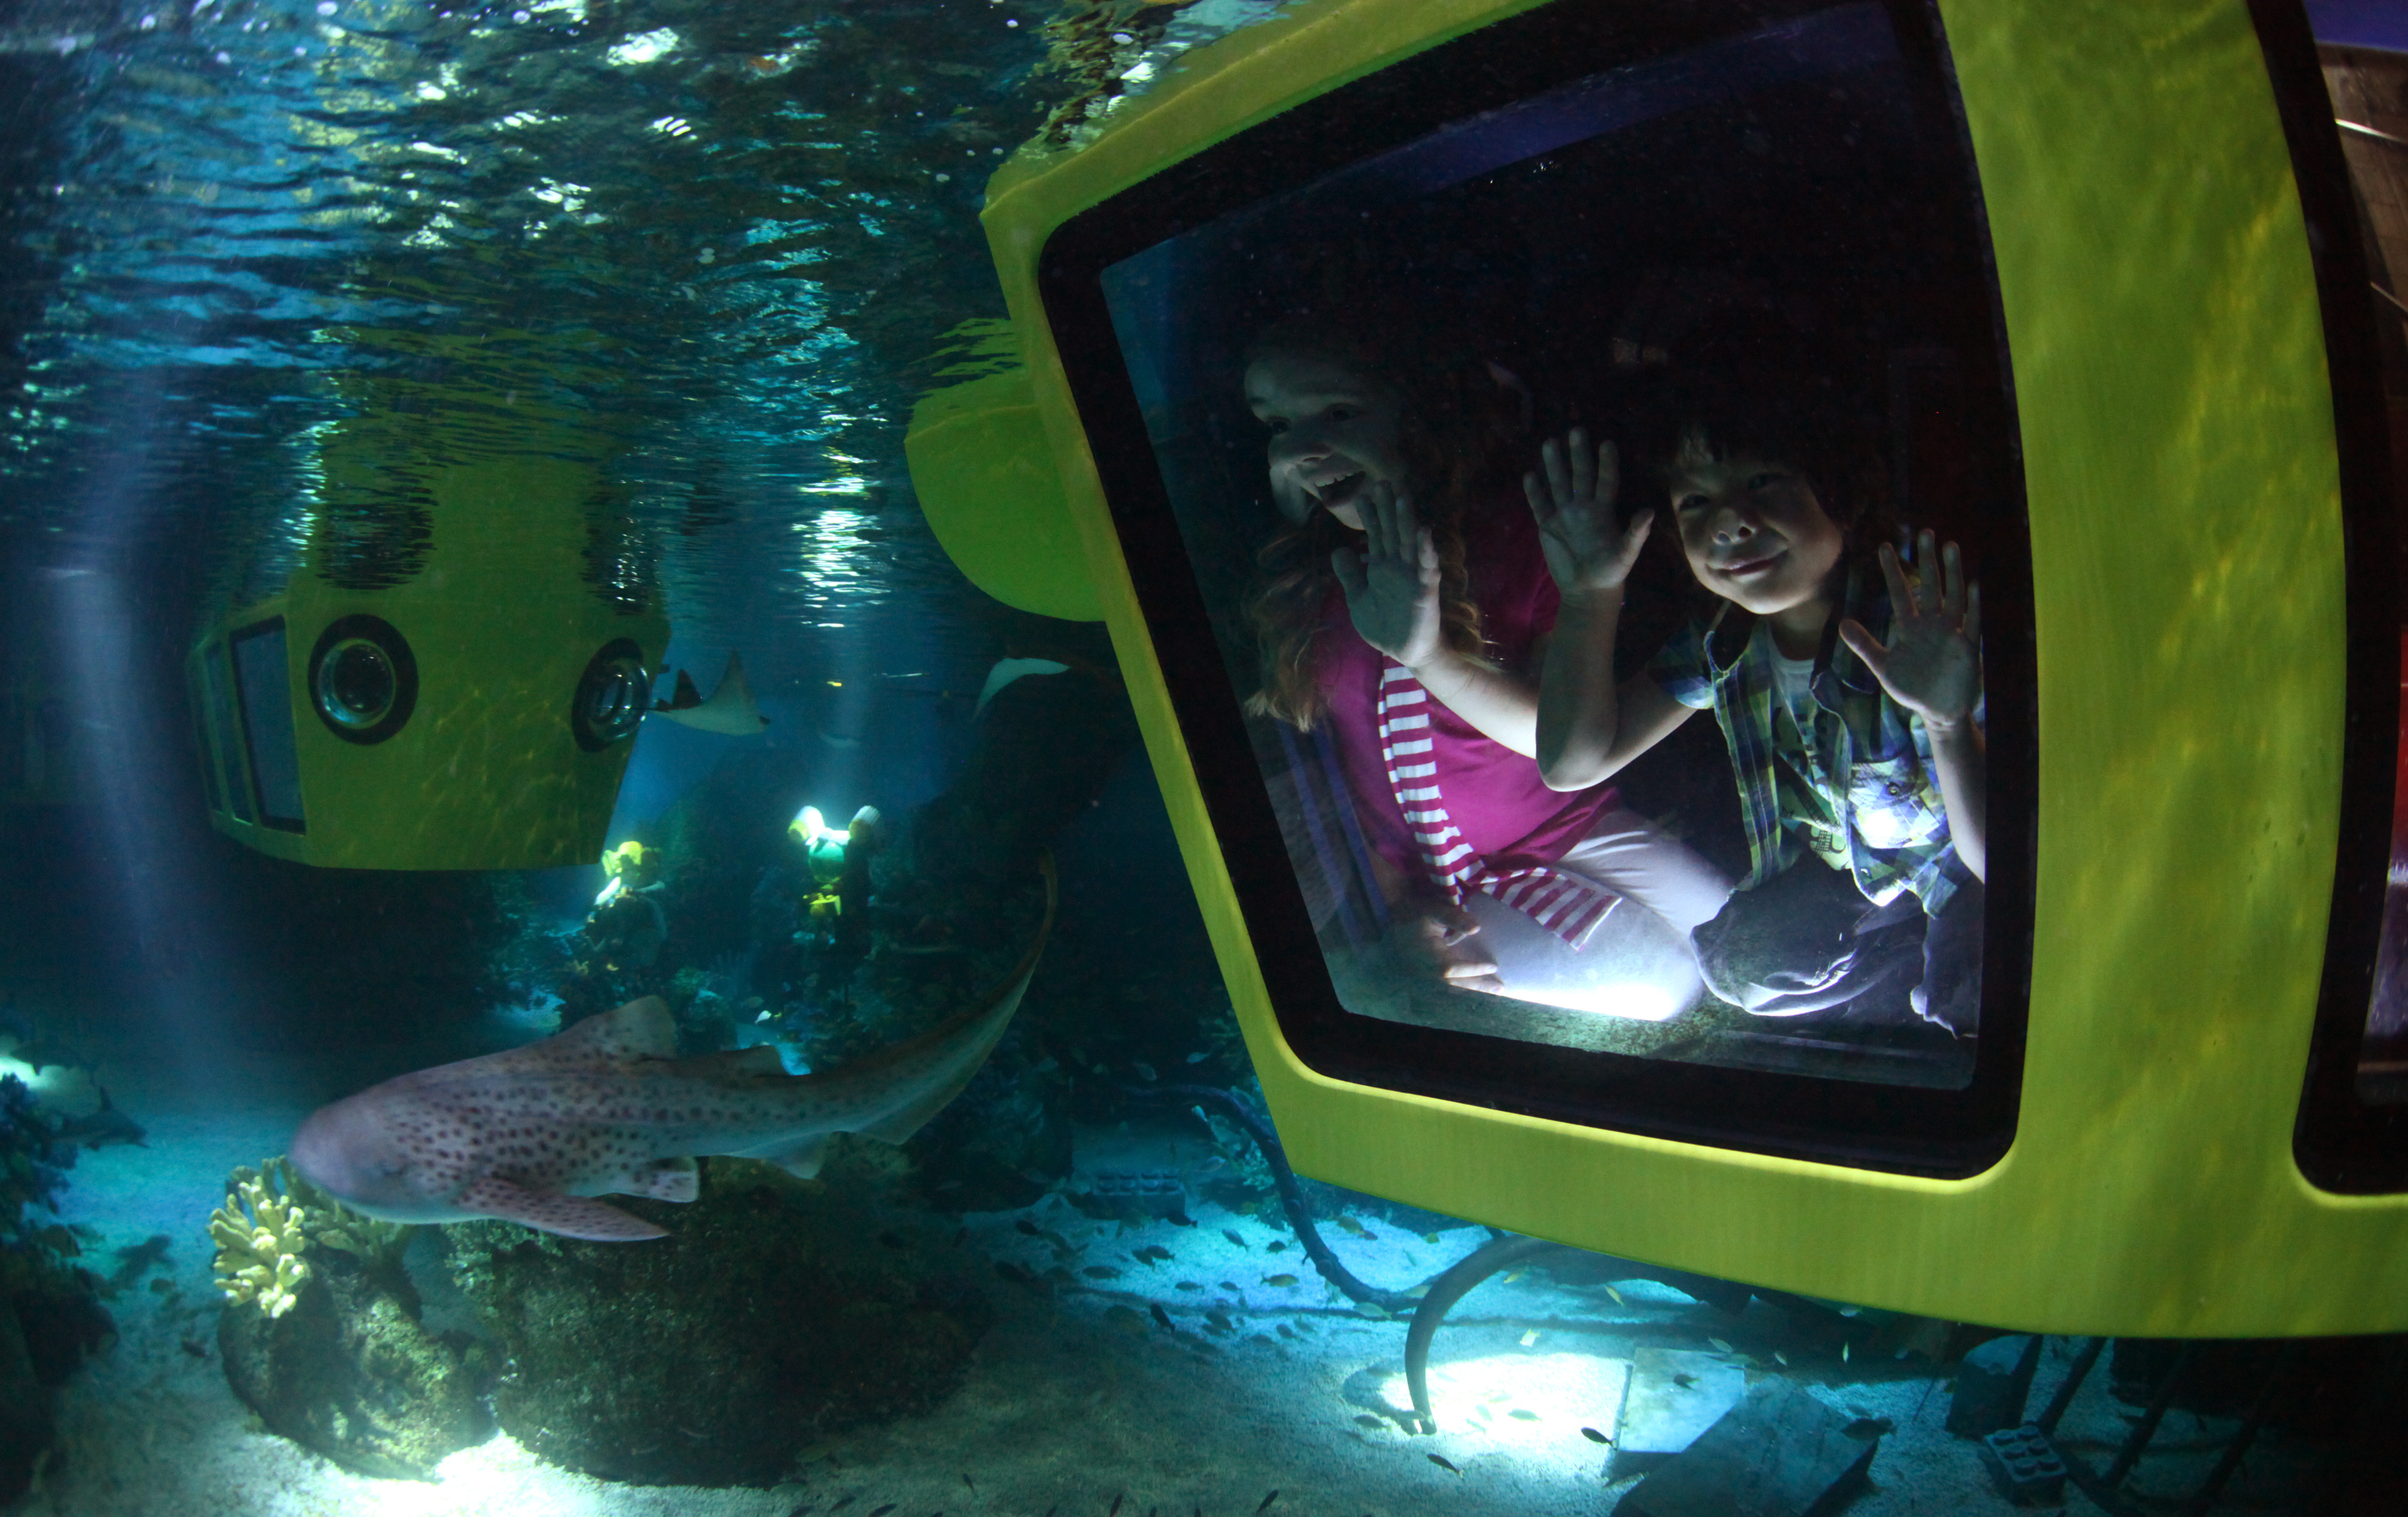 Children in submarine looking out at fish in LEGO City Deep Sea Adventure